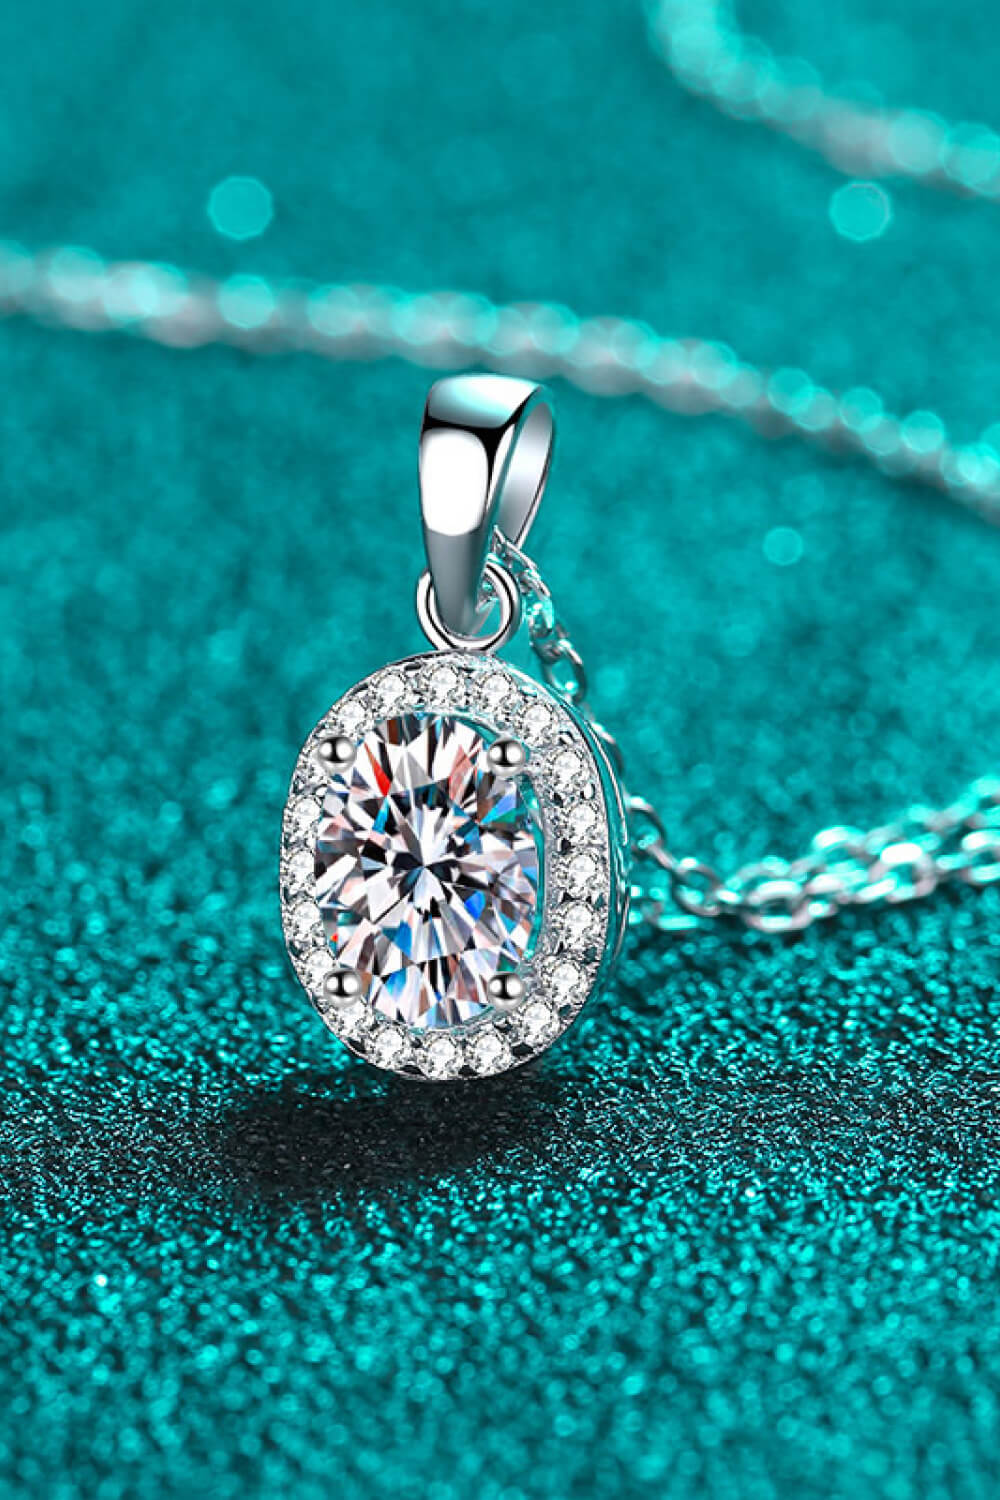 Be The One 1 Carat Moissanite Pendant Necklace Moissanite Jewelry Brides by Emilia Milan 